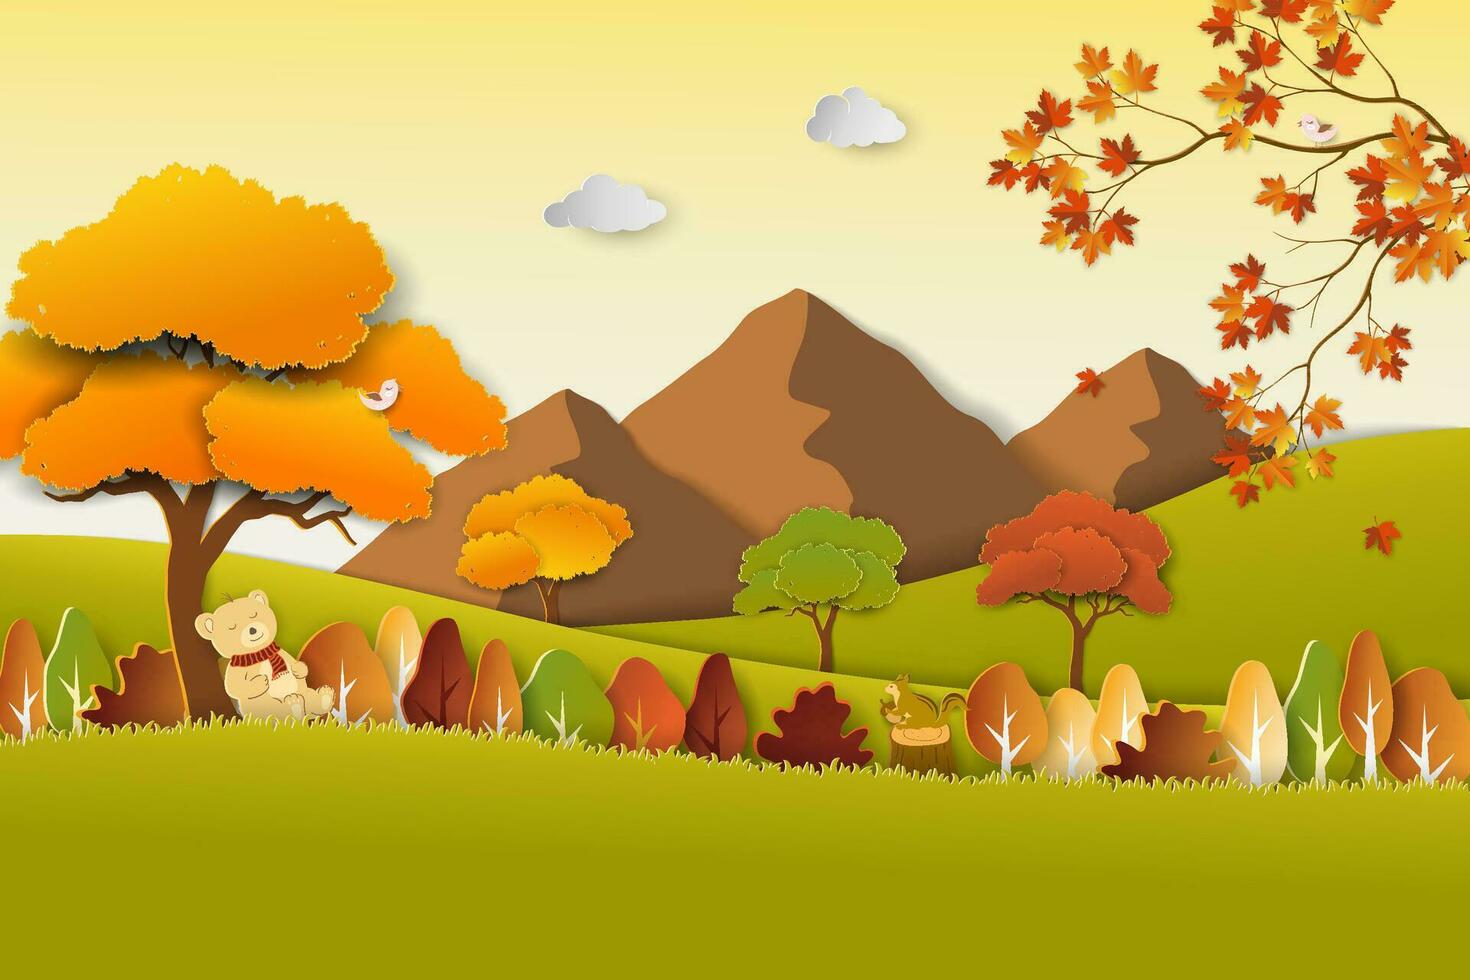 Travel with nature scenery on Autumn landscape,paper art colorful trees and leaves on fall season vector